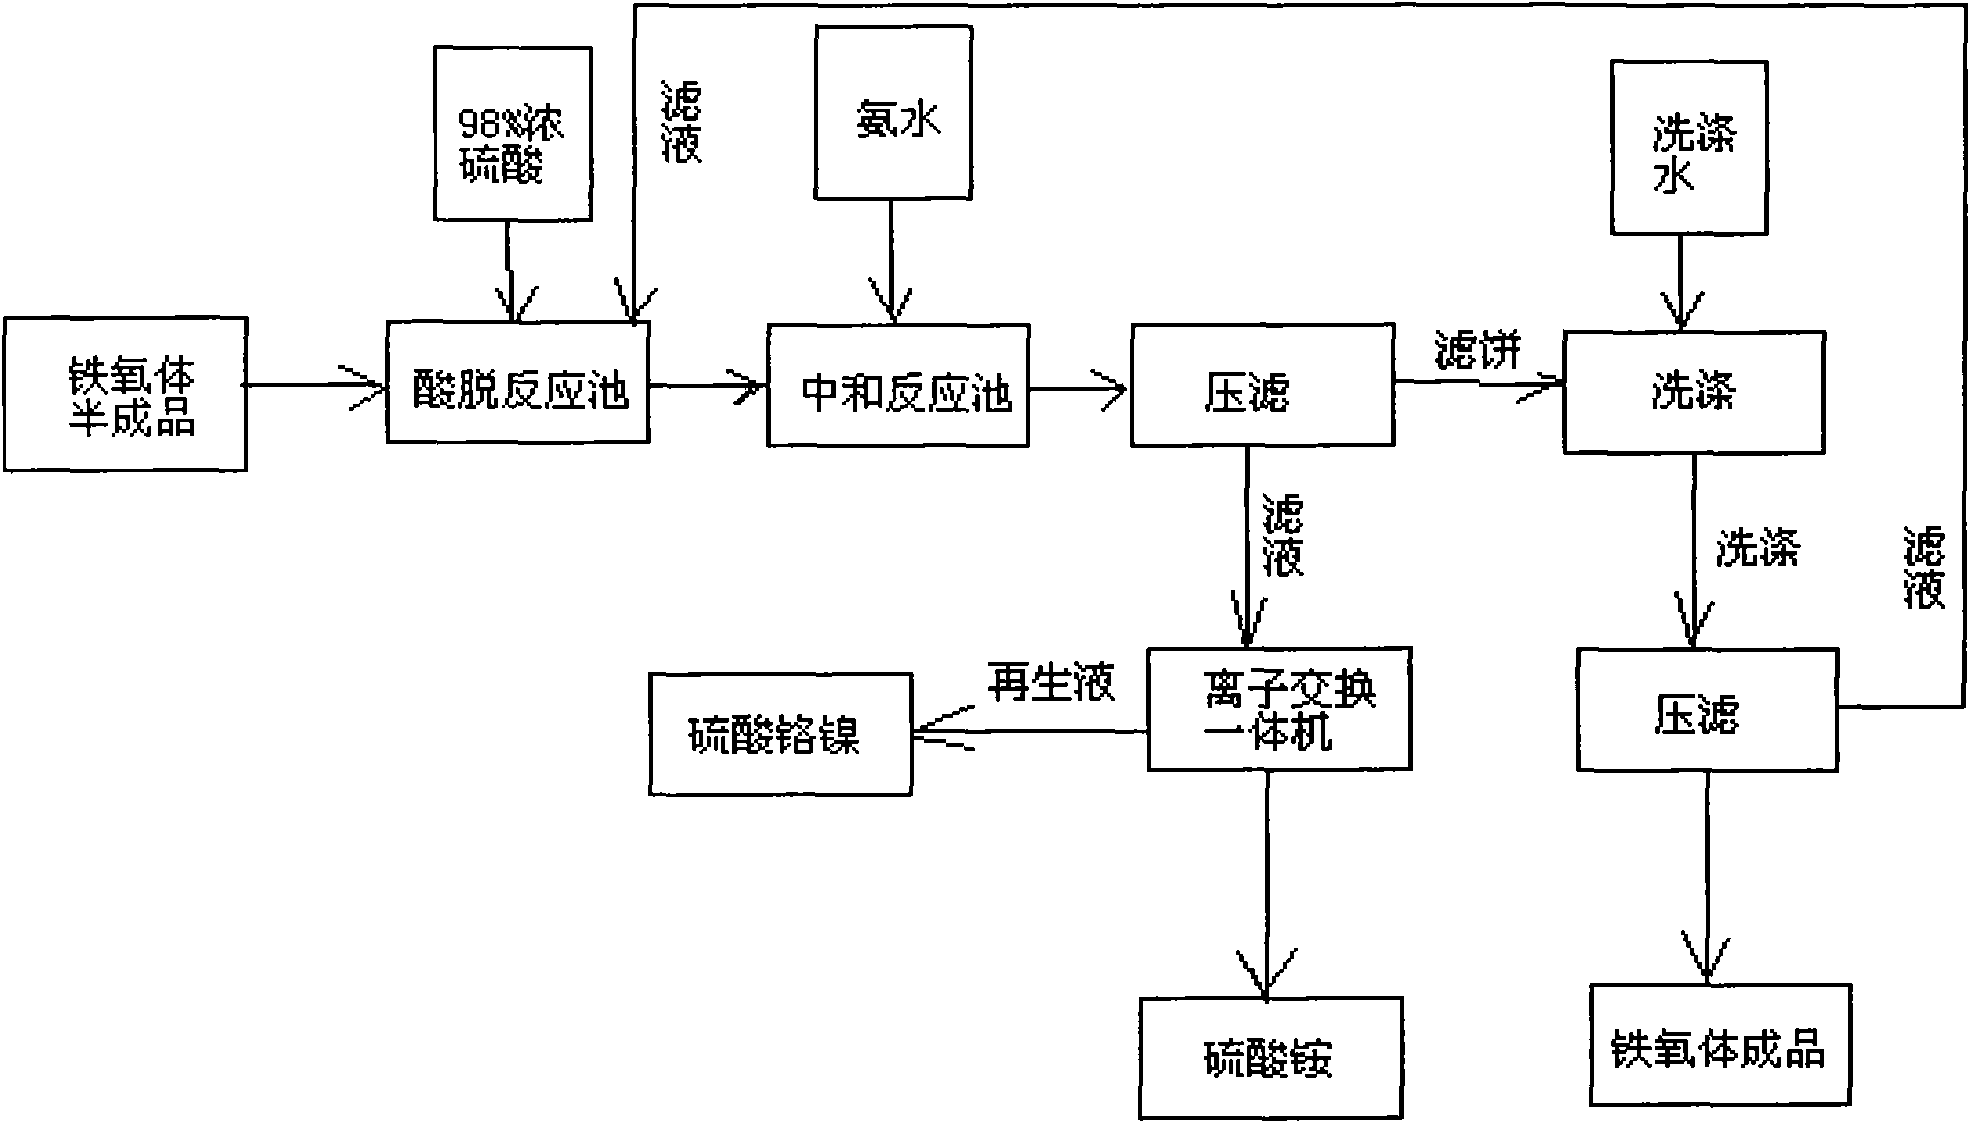 Purification method of semi-finished ferrite product containing chromium and nickel